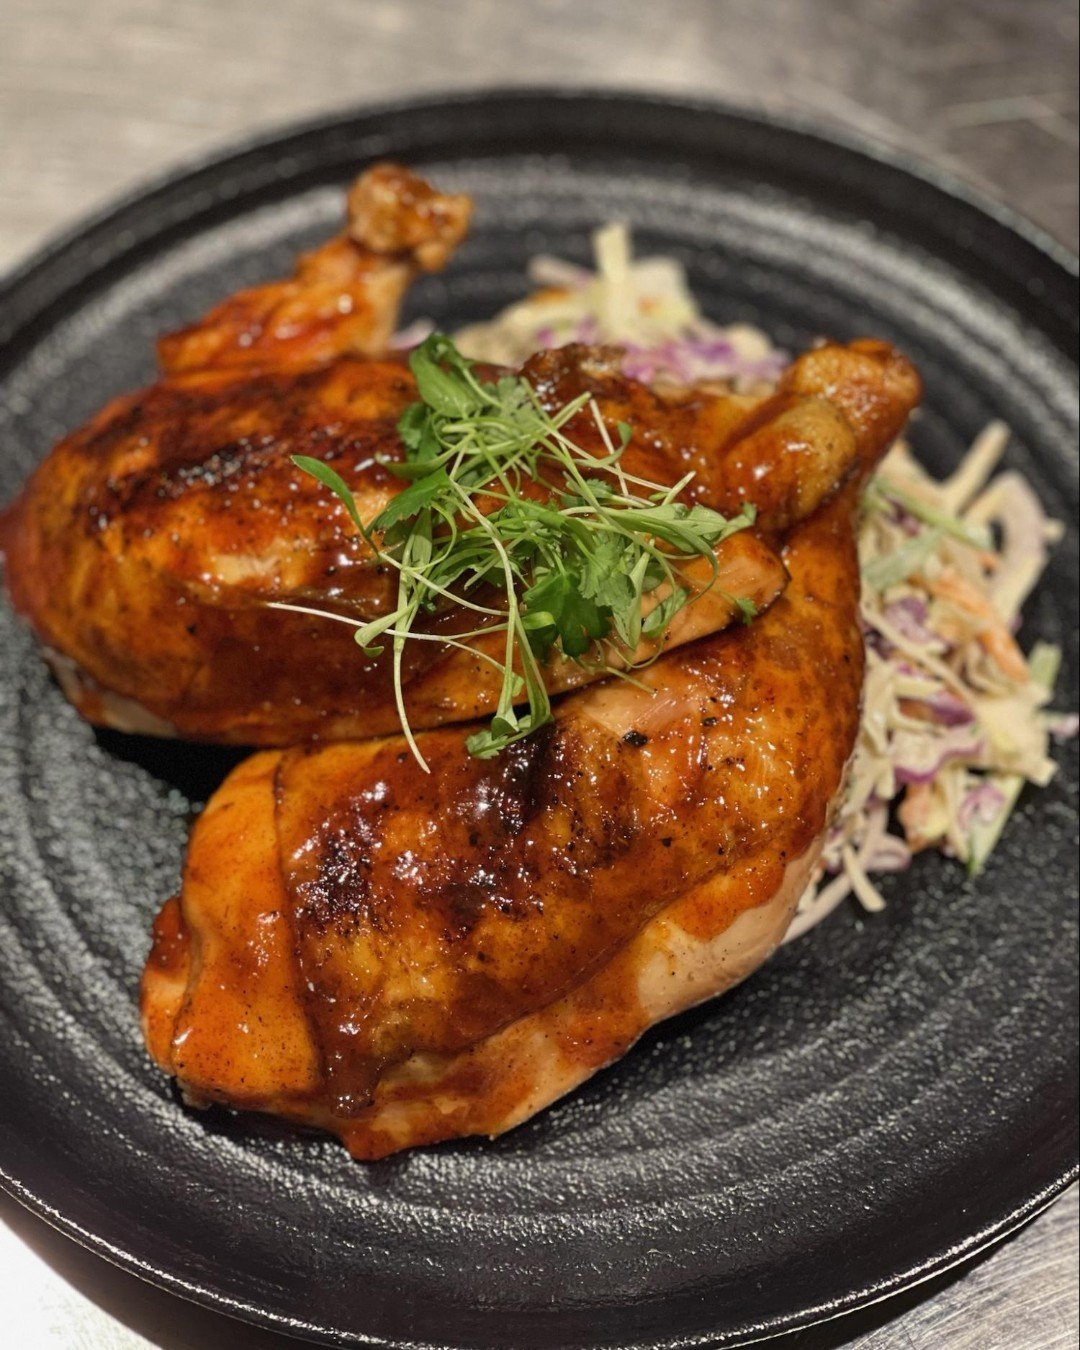 Where there&rsquo;s smoke, there&rsquo;s an open wood fire. 

The Smokehouse Chicken: Spicy Honey Ancho BBQ and a side of slaw - the best of the backyard fare.